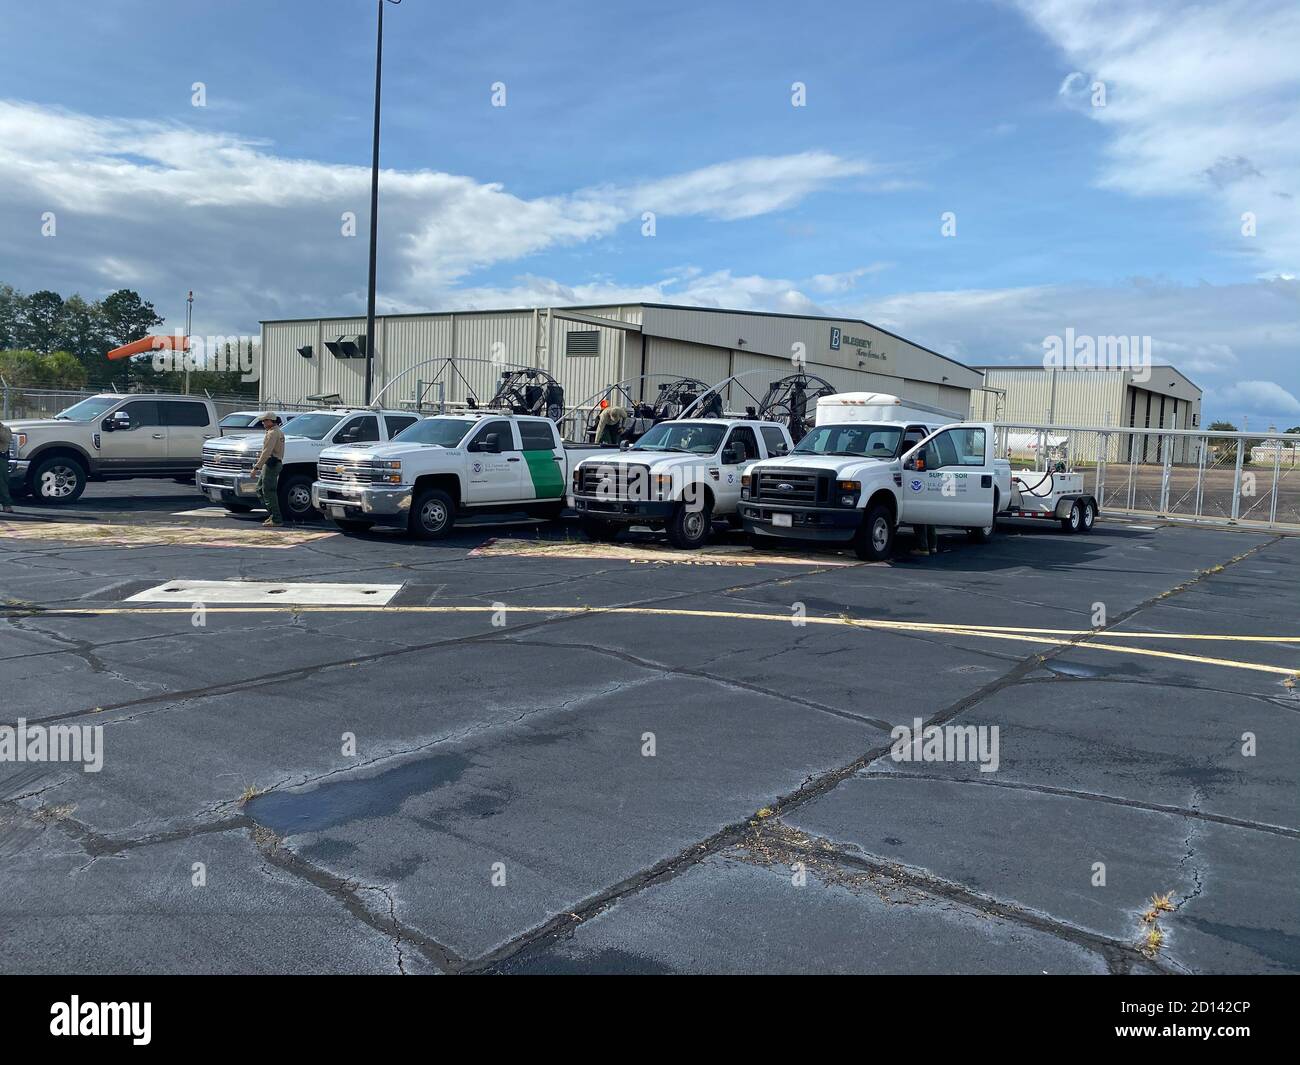 U.S. Border Patrol agents and boats arrive in Hammond, La, and attend an open air muster Sept. 15, 2020. The assets are being pre-positioned to provide response to the Gulf Coast region in advance of Hurricane Sally. Stock Photo